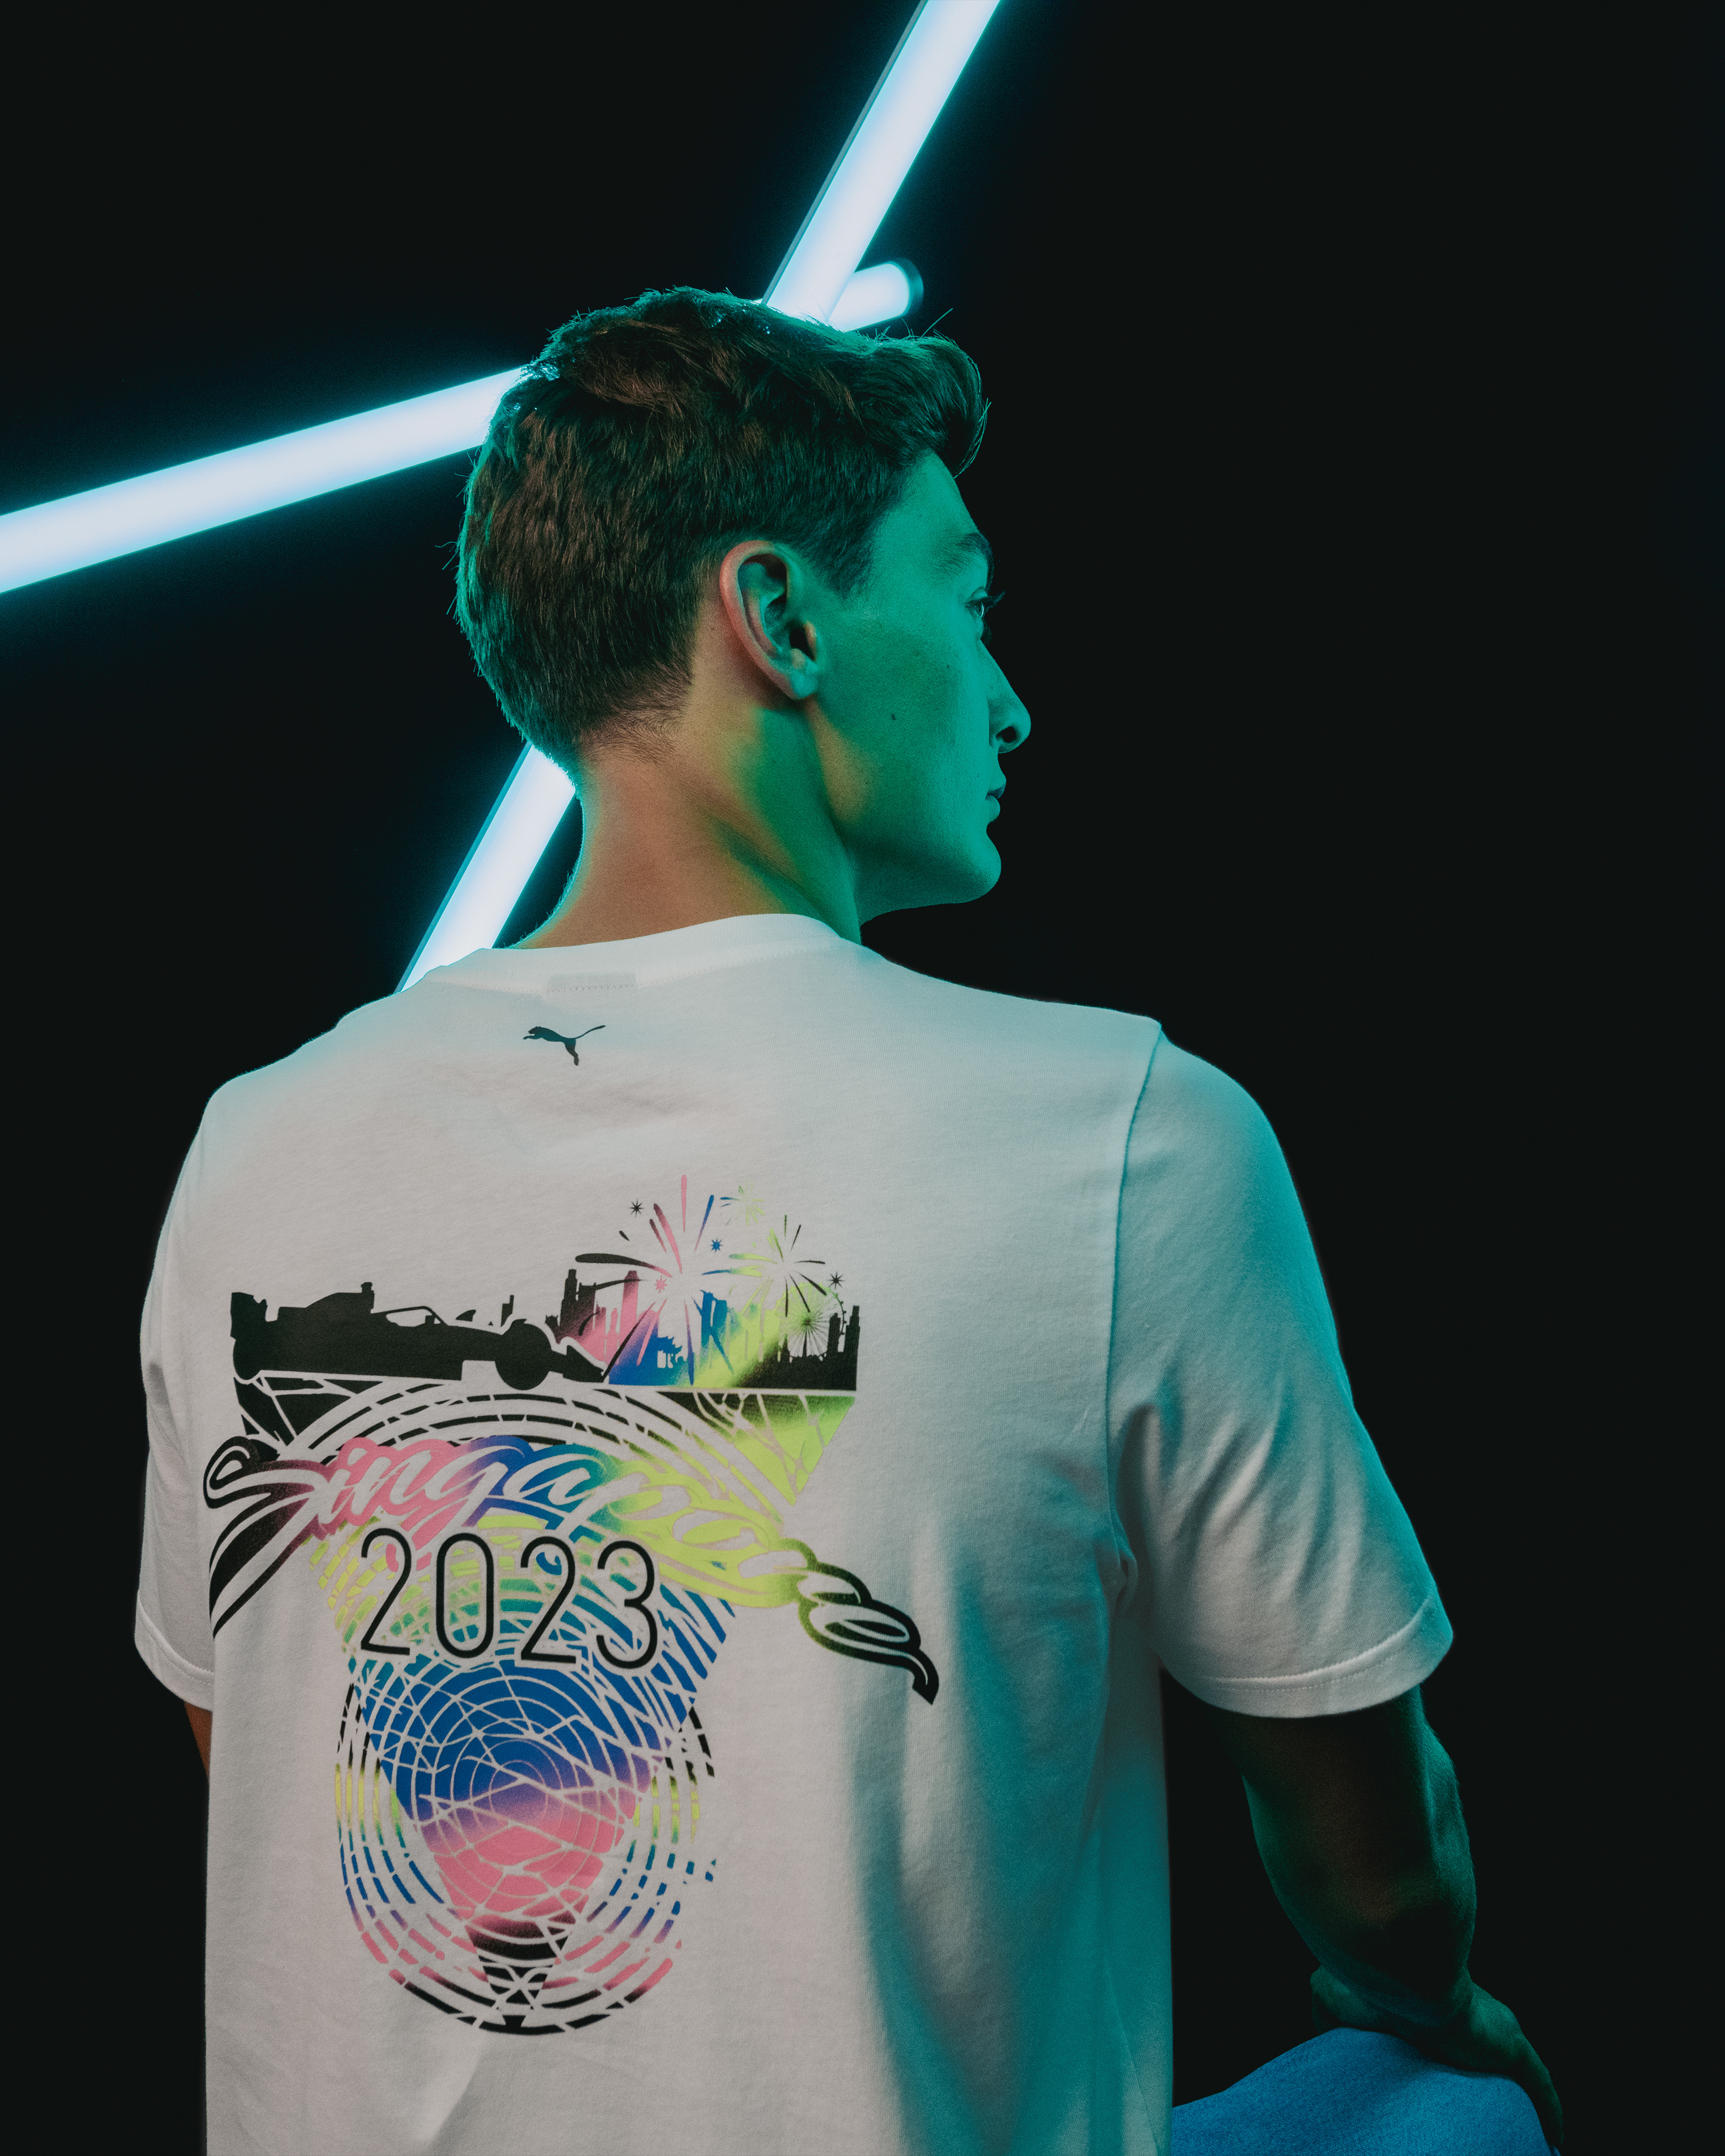 Mens 2023 Singapore Special Edition Tee White